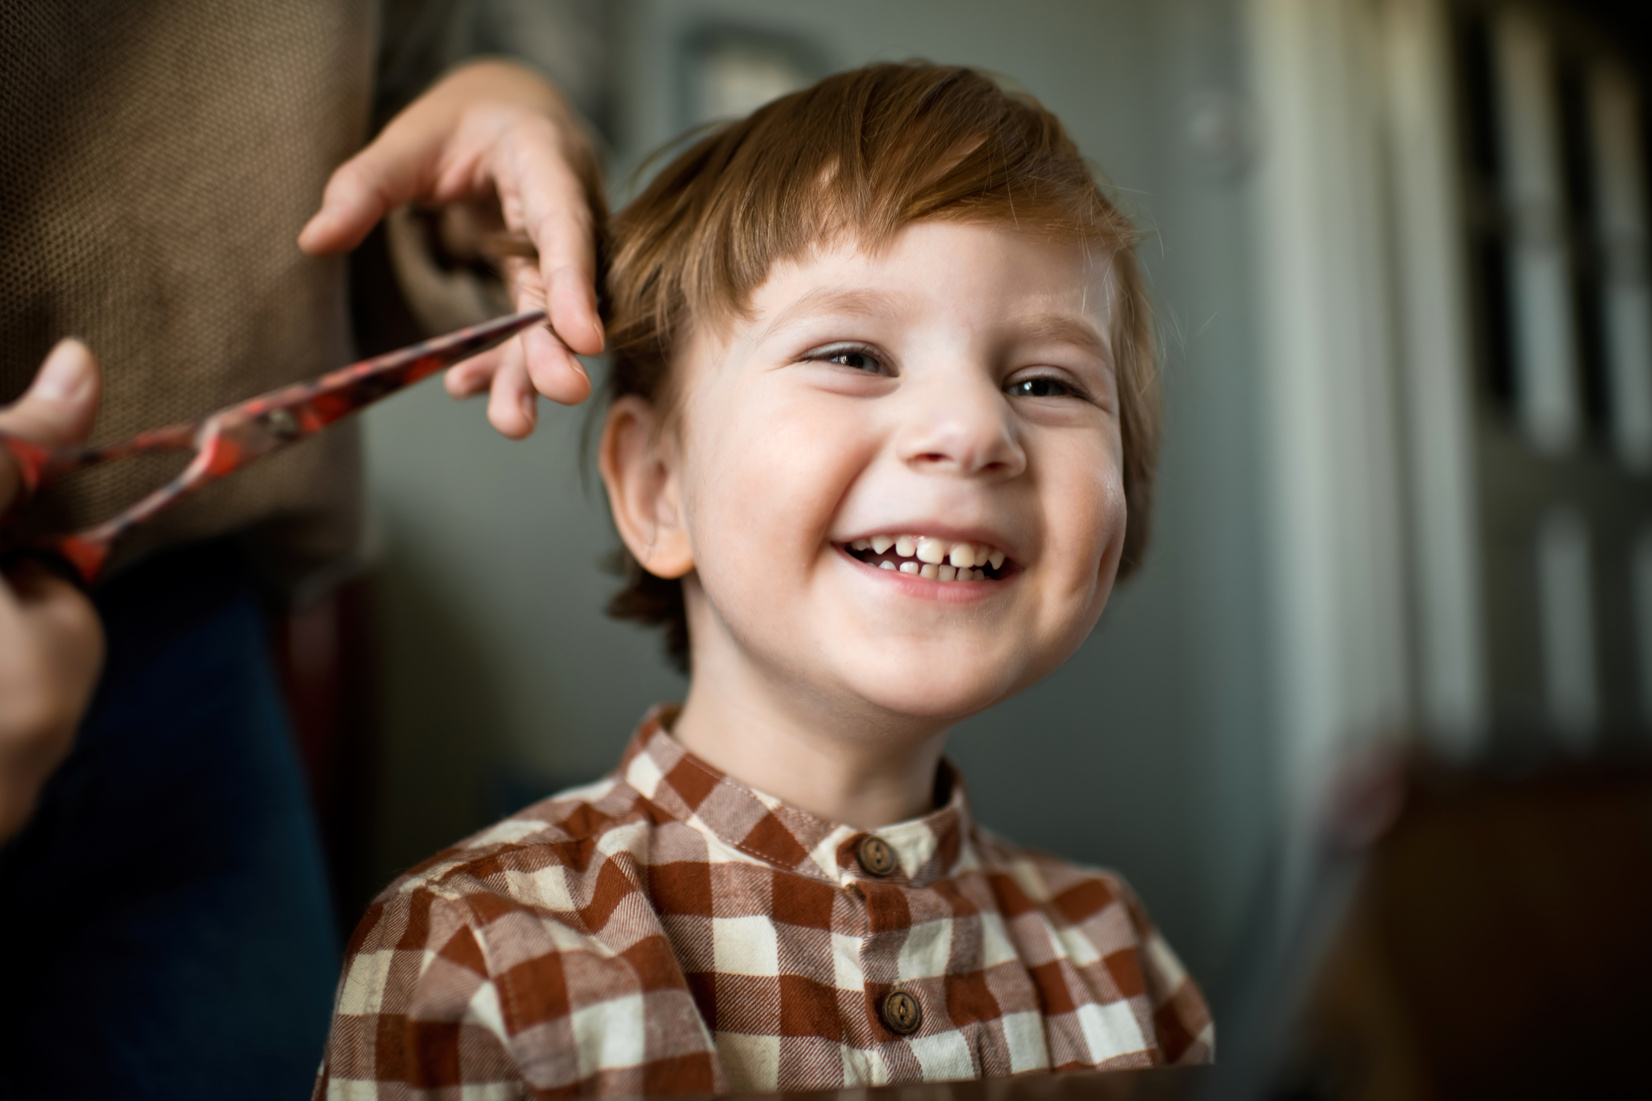 Cutting child's hair at home